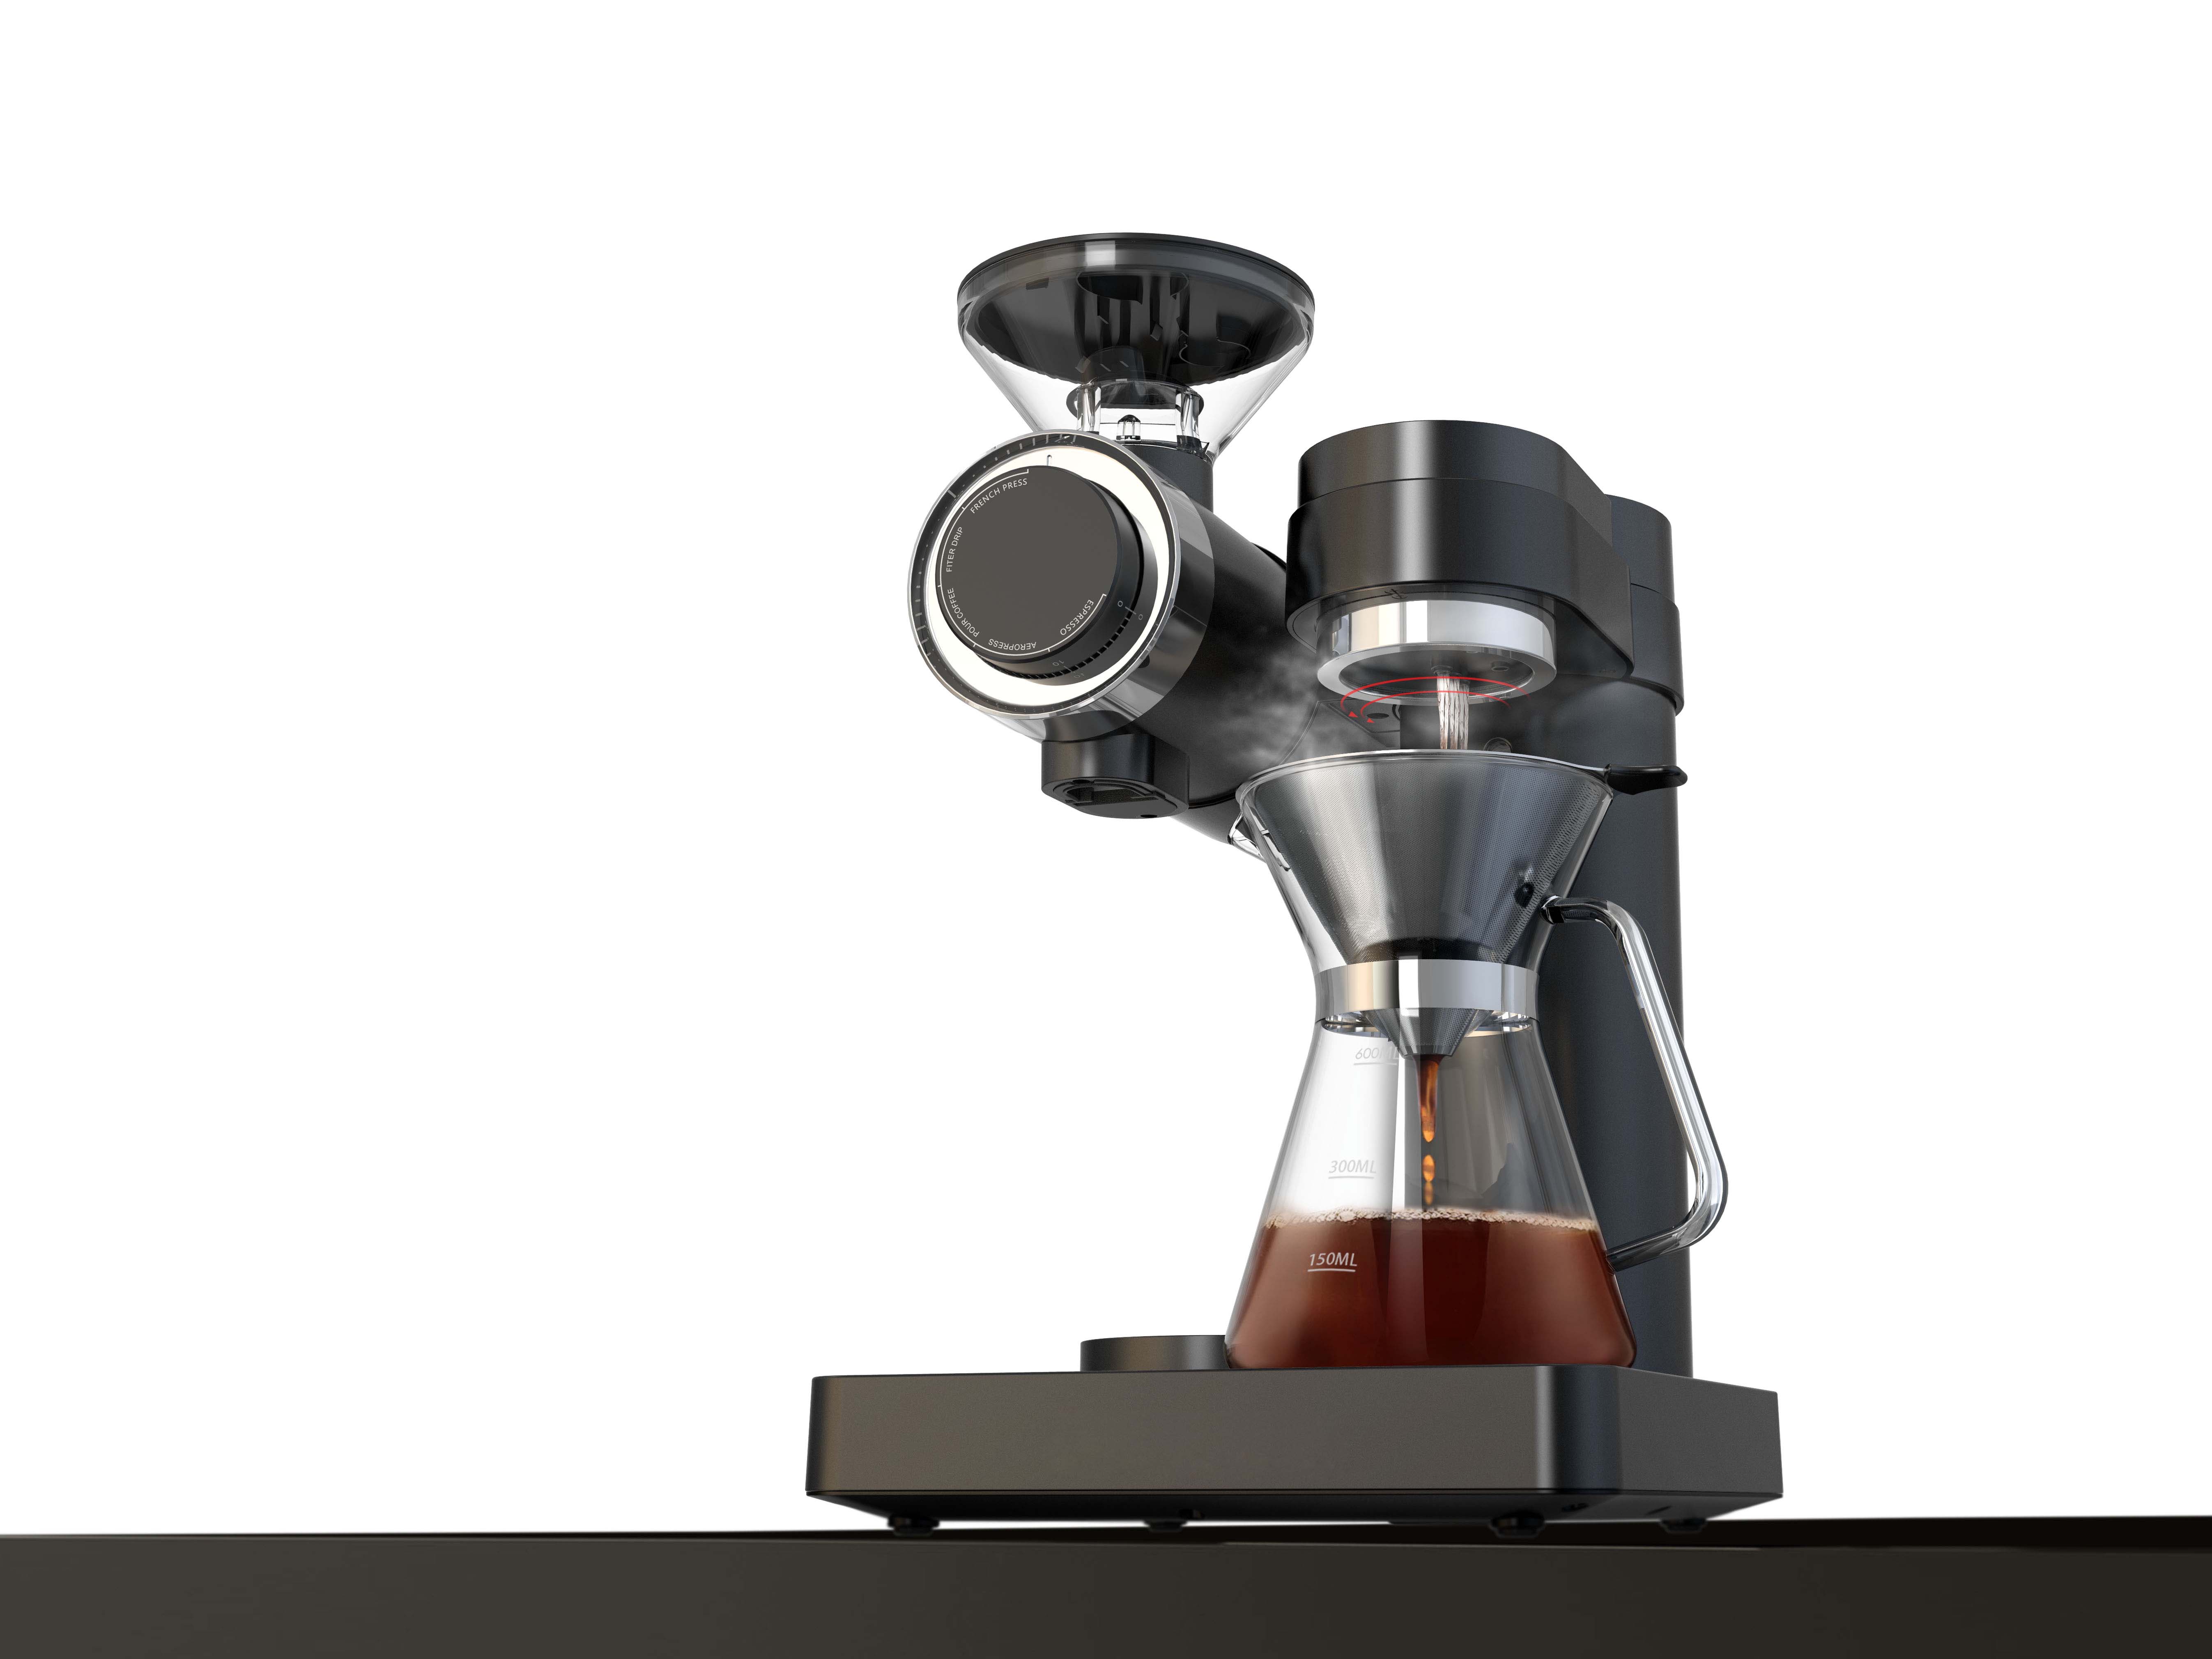 Smart pour-over coffee maker